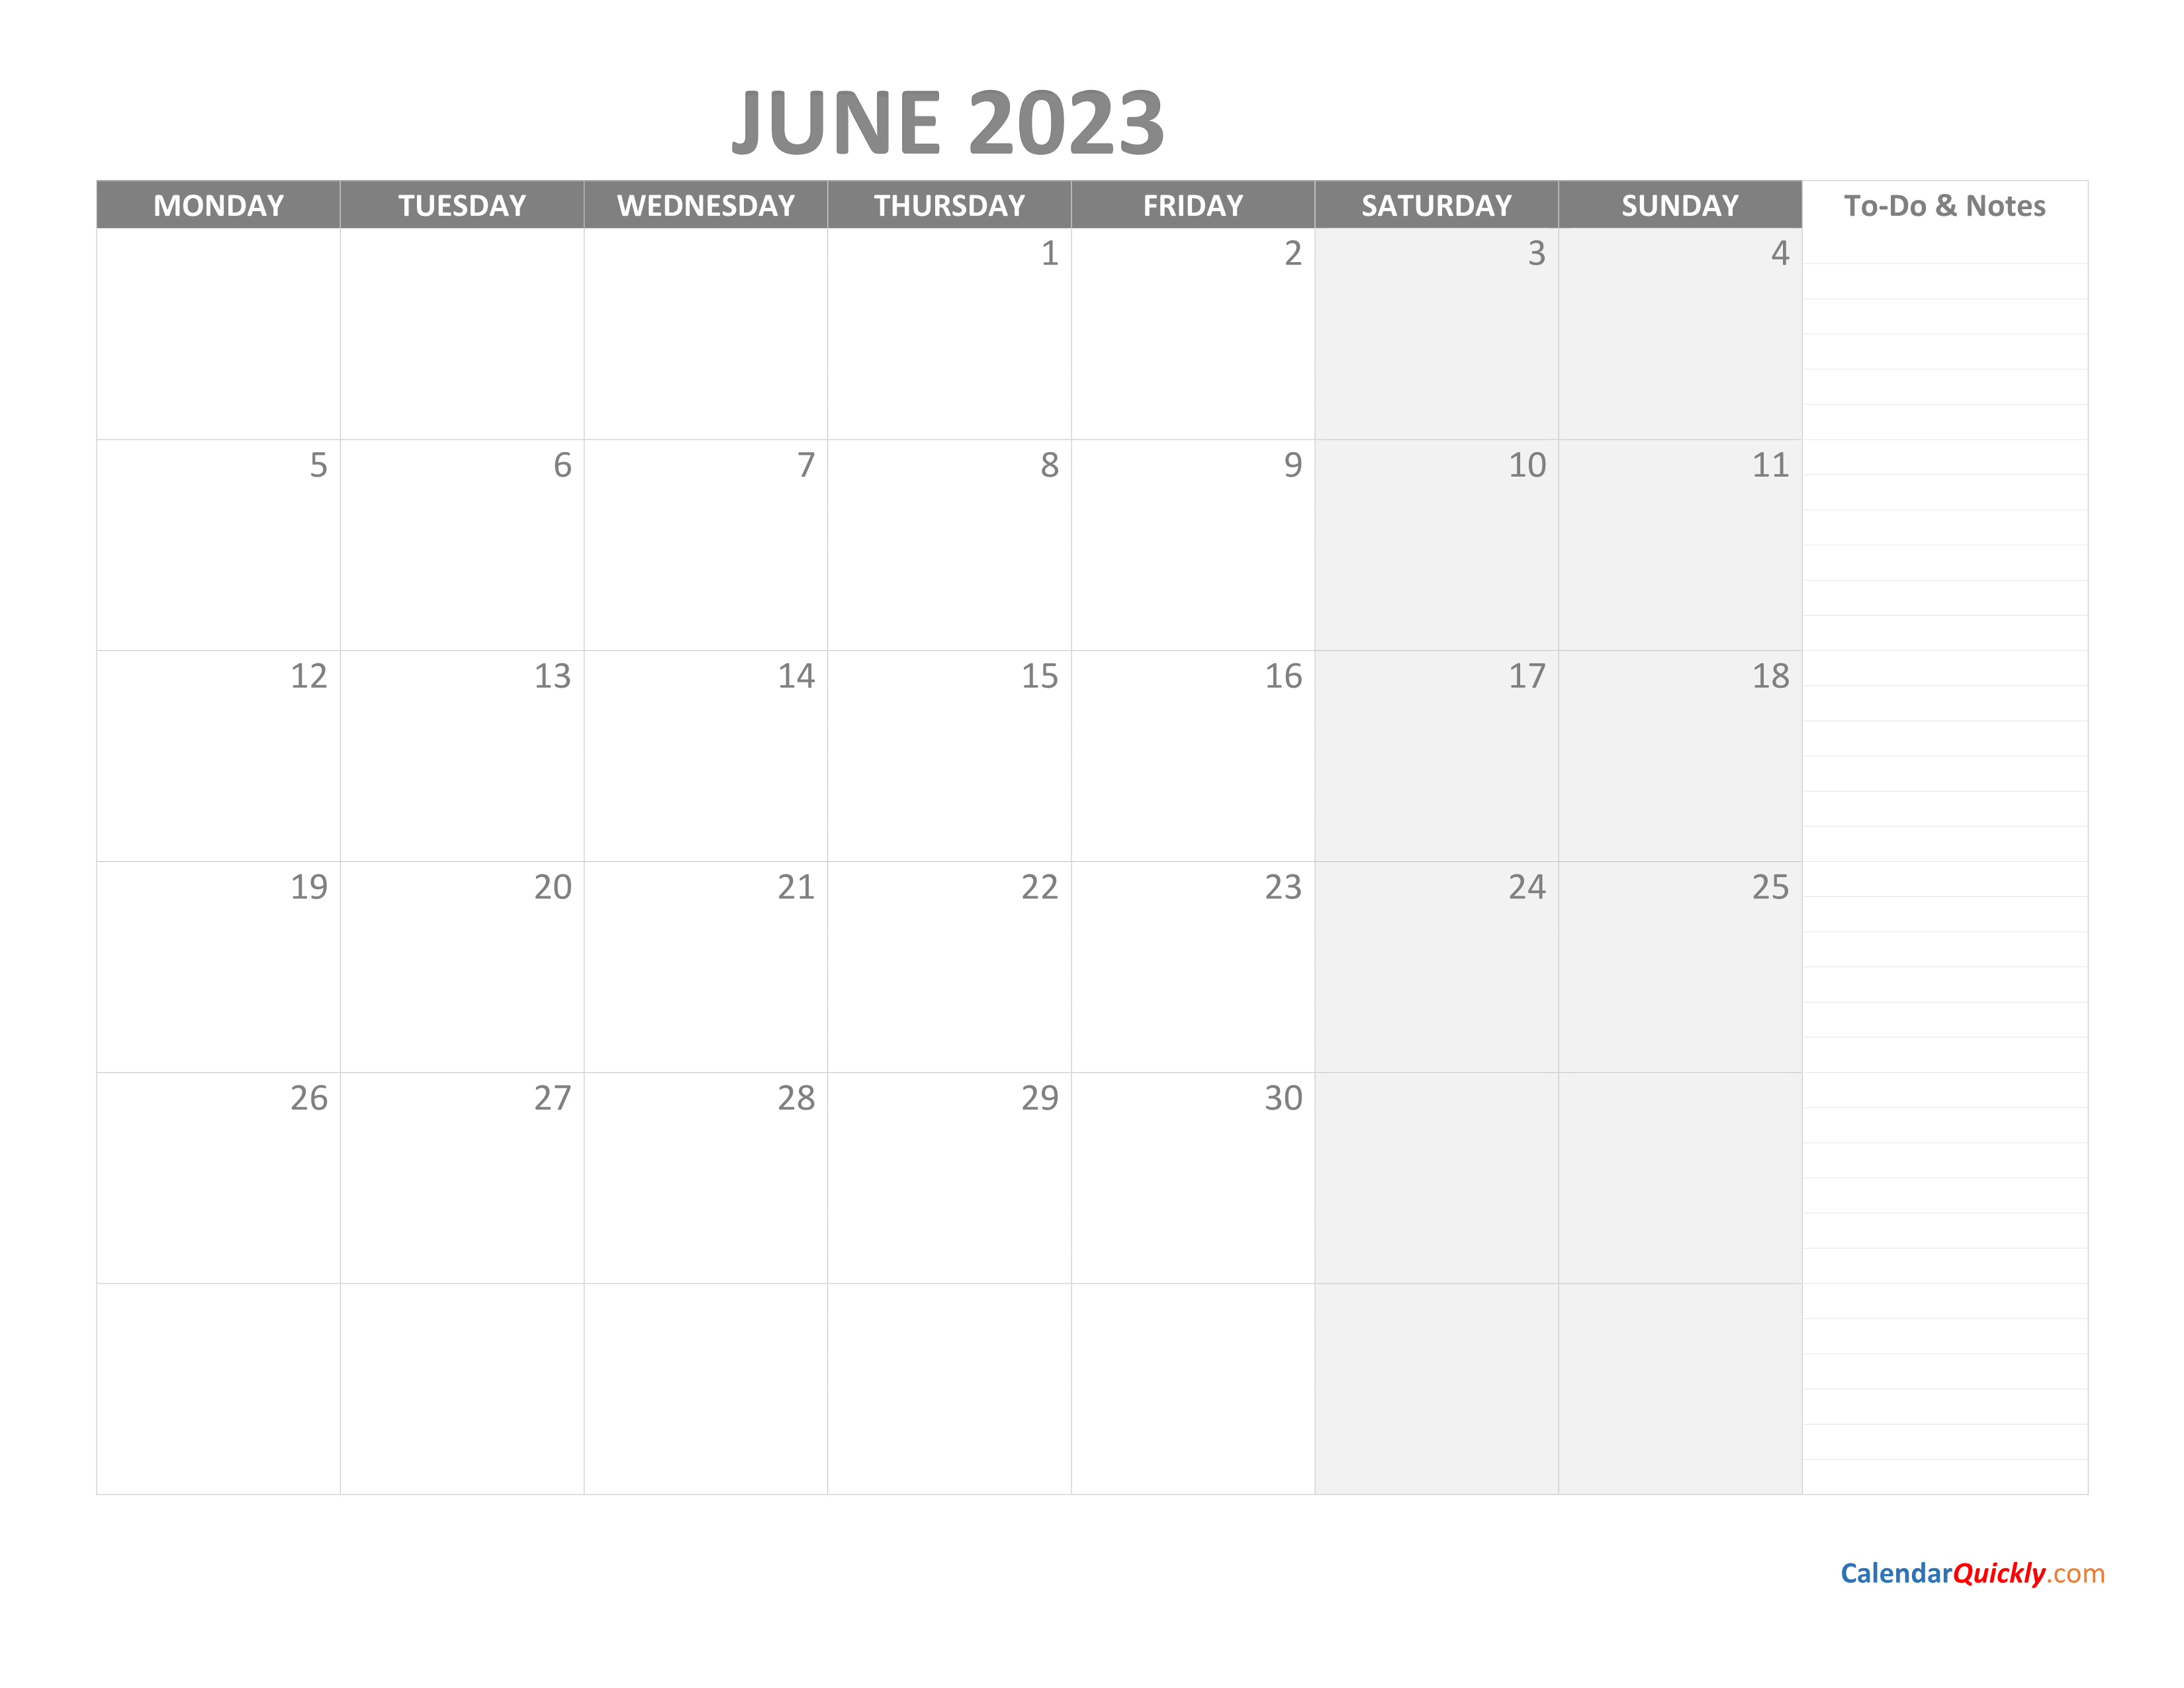 June Monday Calendar 2023 With Notes Calendar Quickly | Free Hot Nude ...